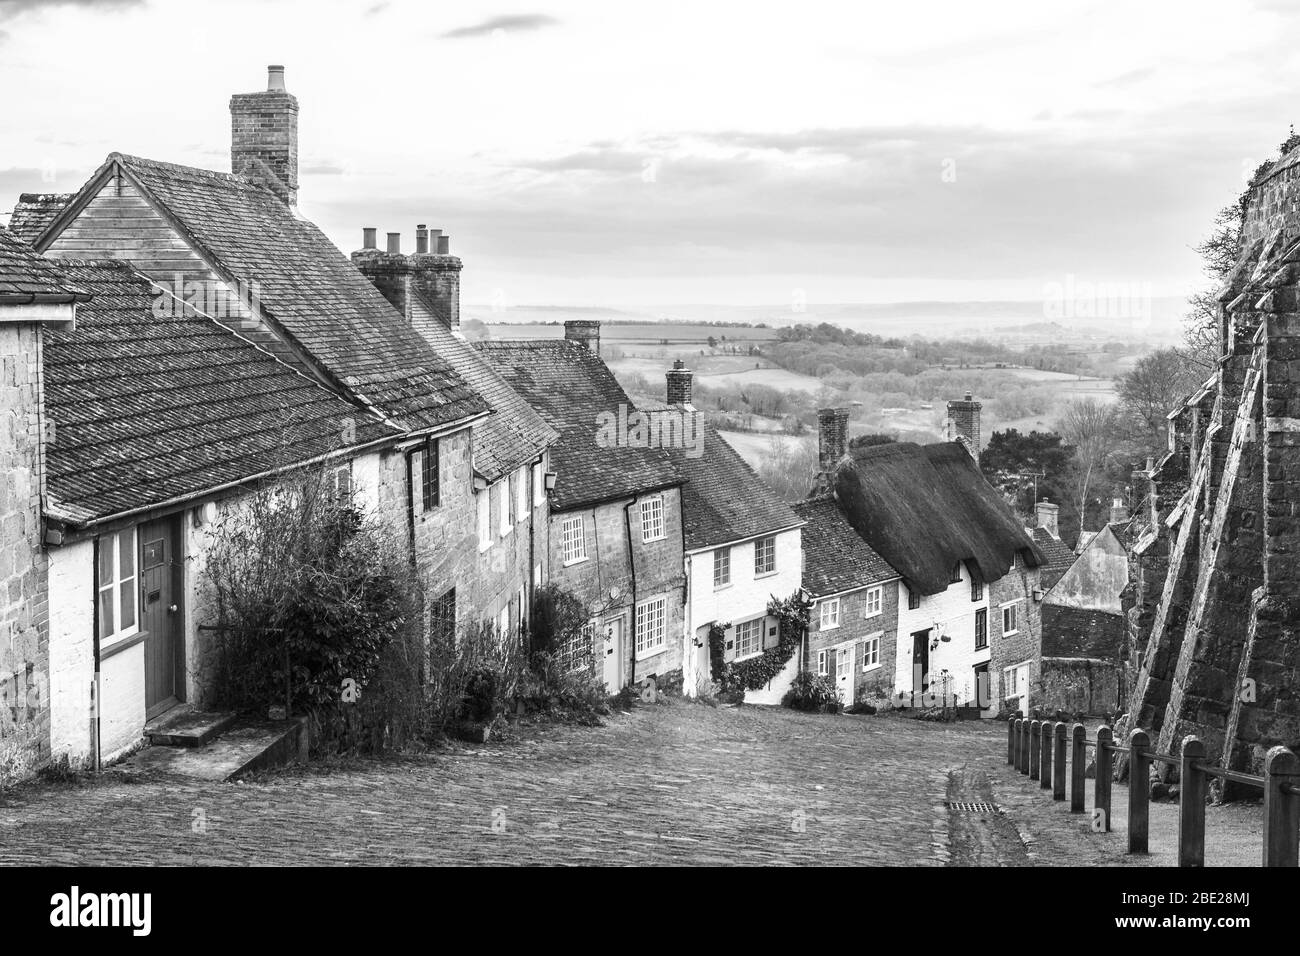 Gold Hill, Shaftesbury, UK, Black and White image of the steep hill and cobbled street with pretty cottages in a timeless image Stock Photo